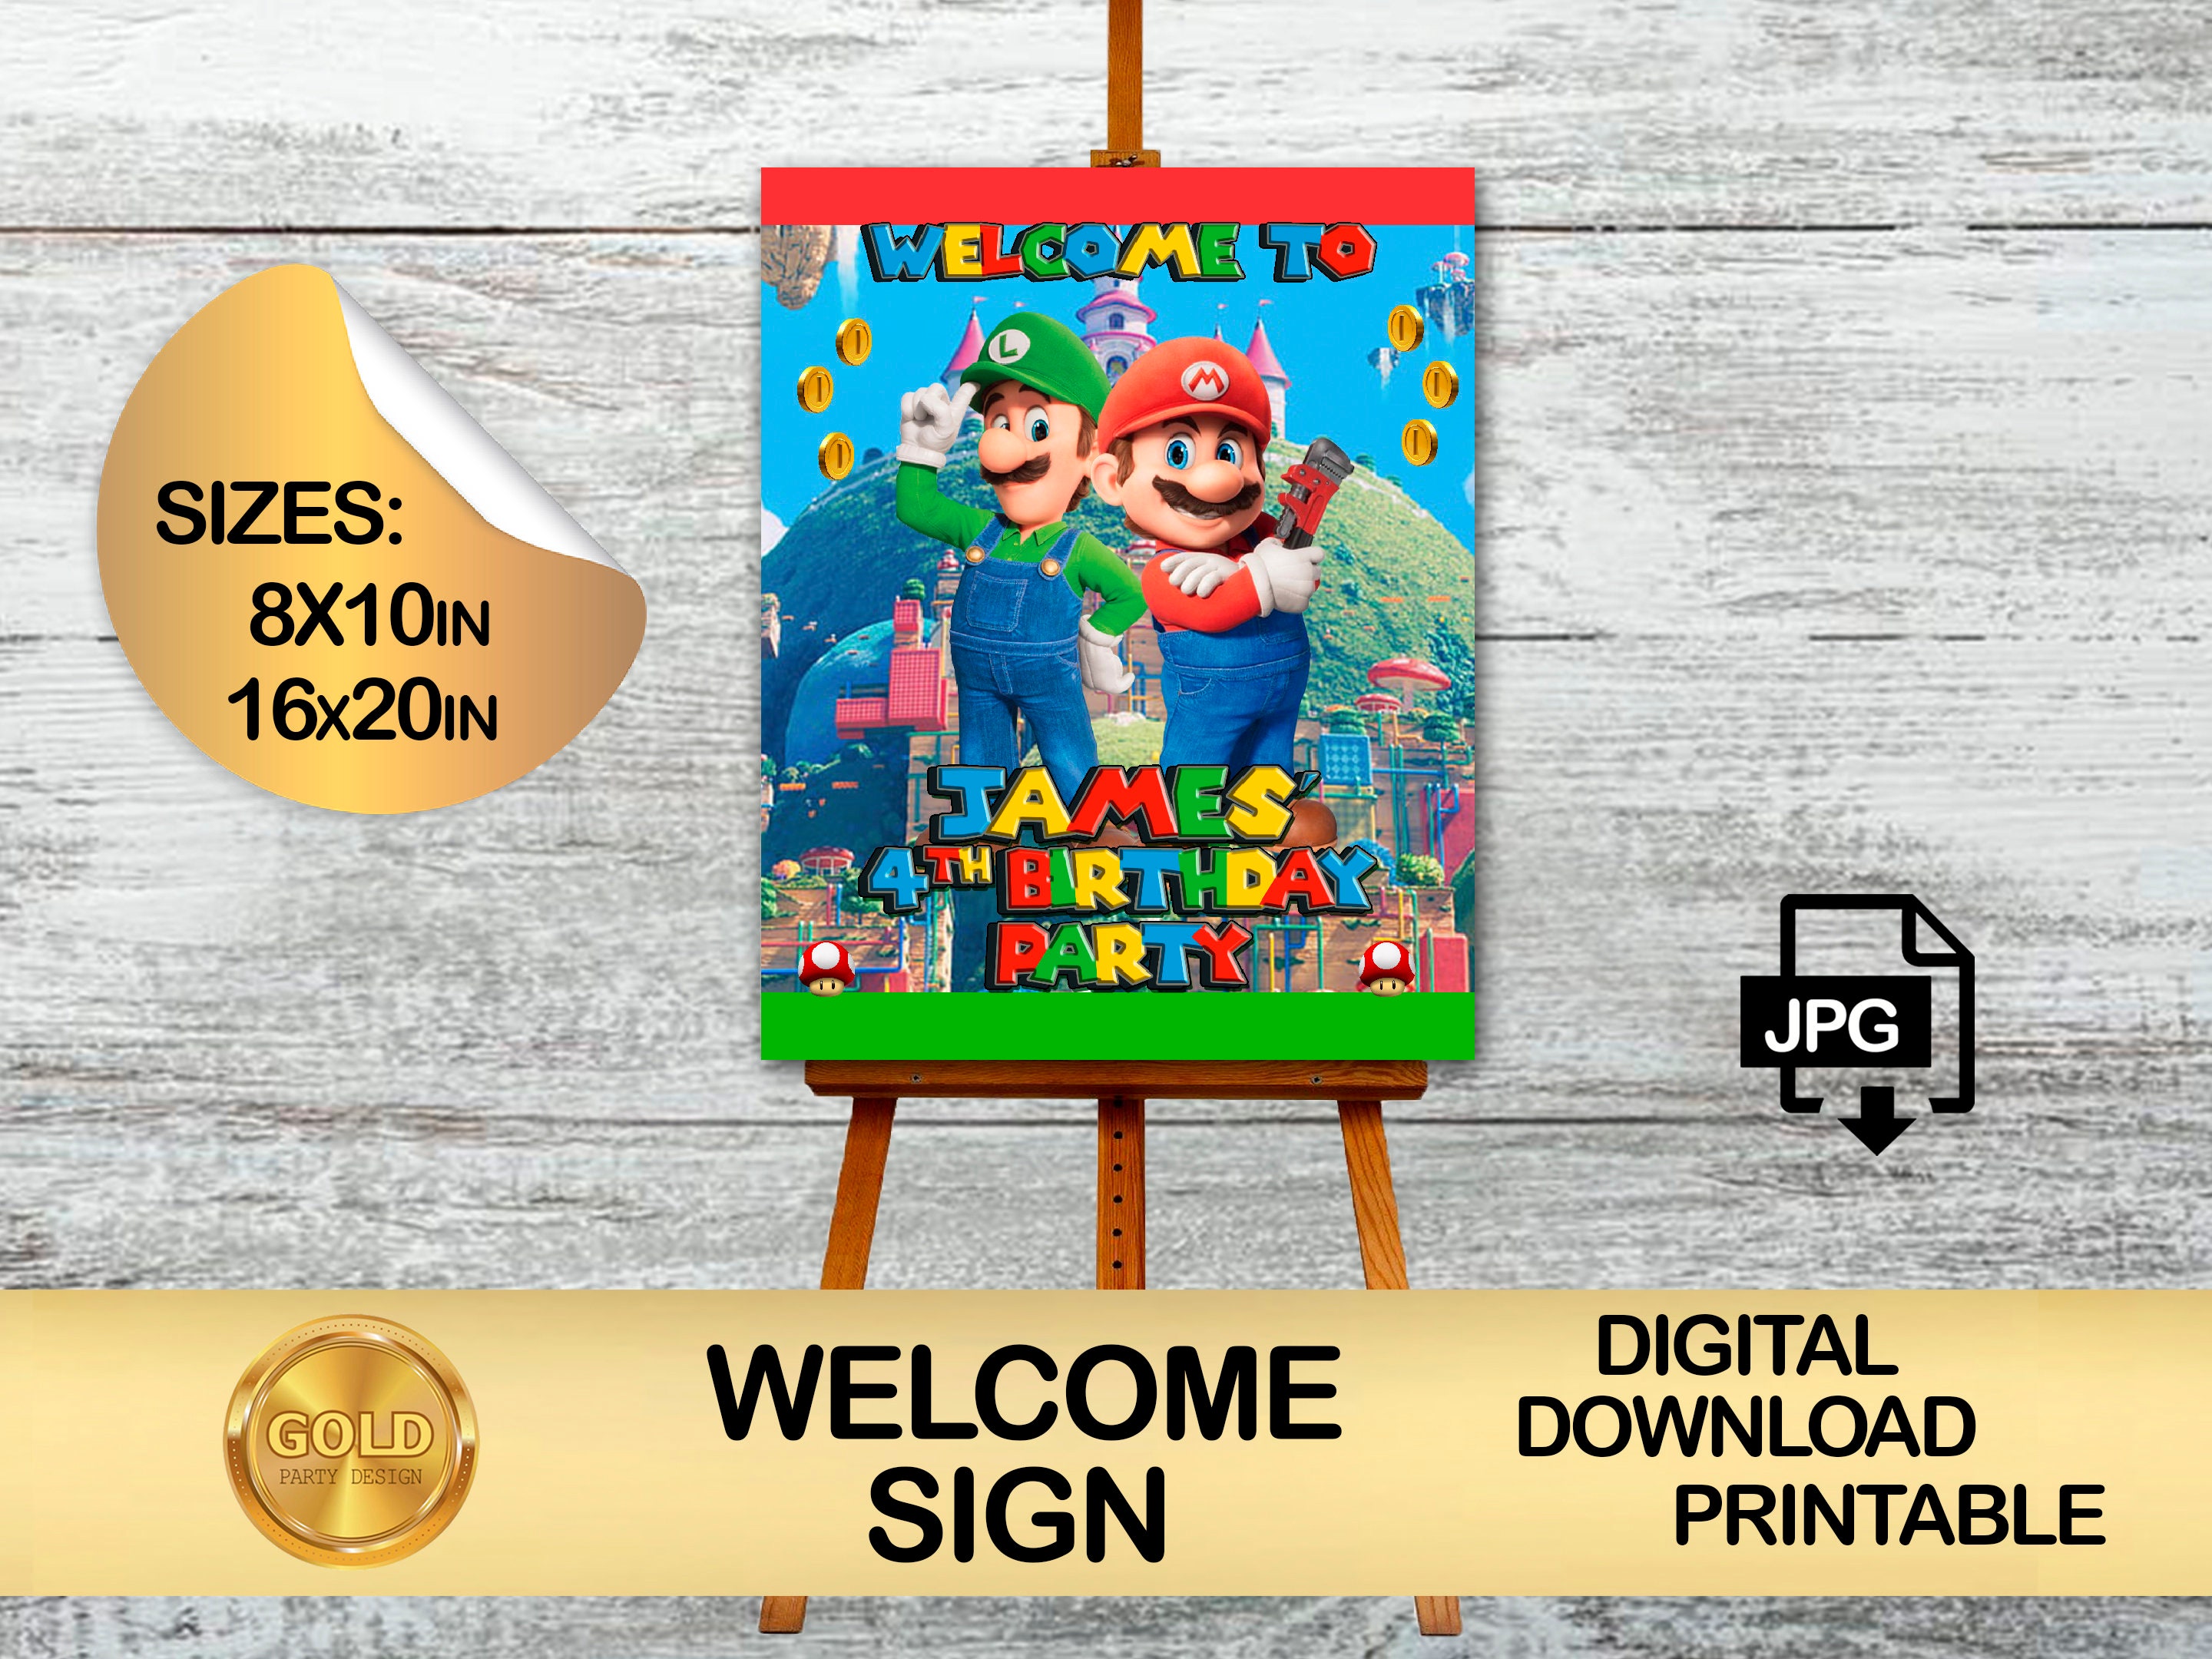 Mario Rabbids Sparks of Hope Kingdom Battle Video Game PNG Images Clipart  Birthday Invitation Stickers Rosalina Poster Cricut Cursa -  Denmark